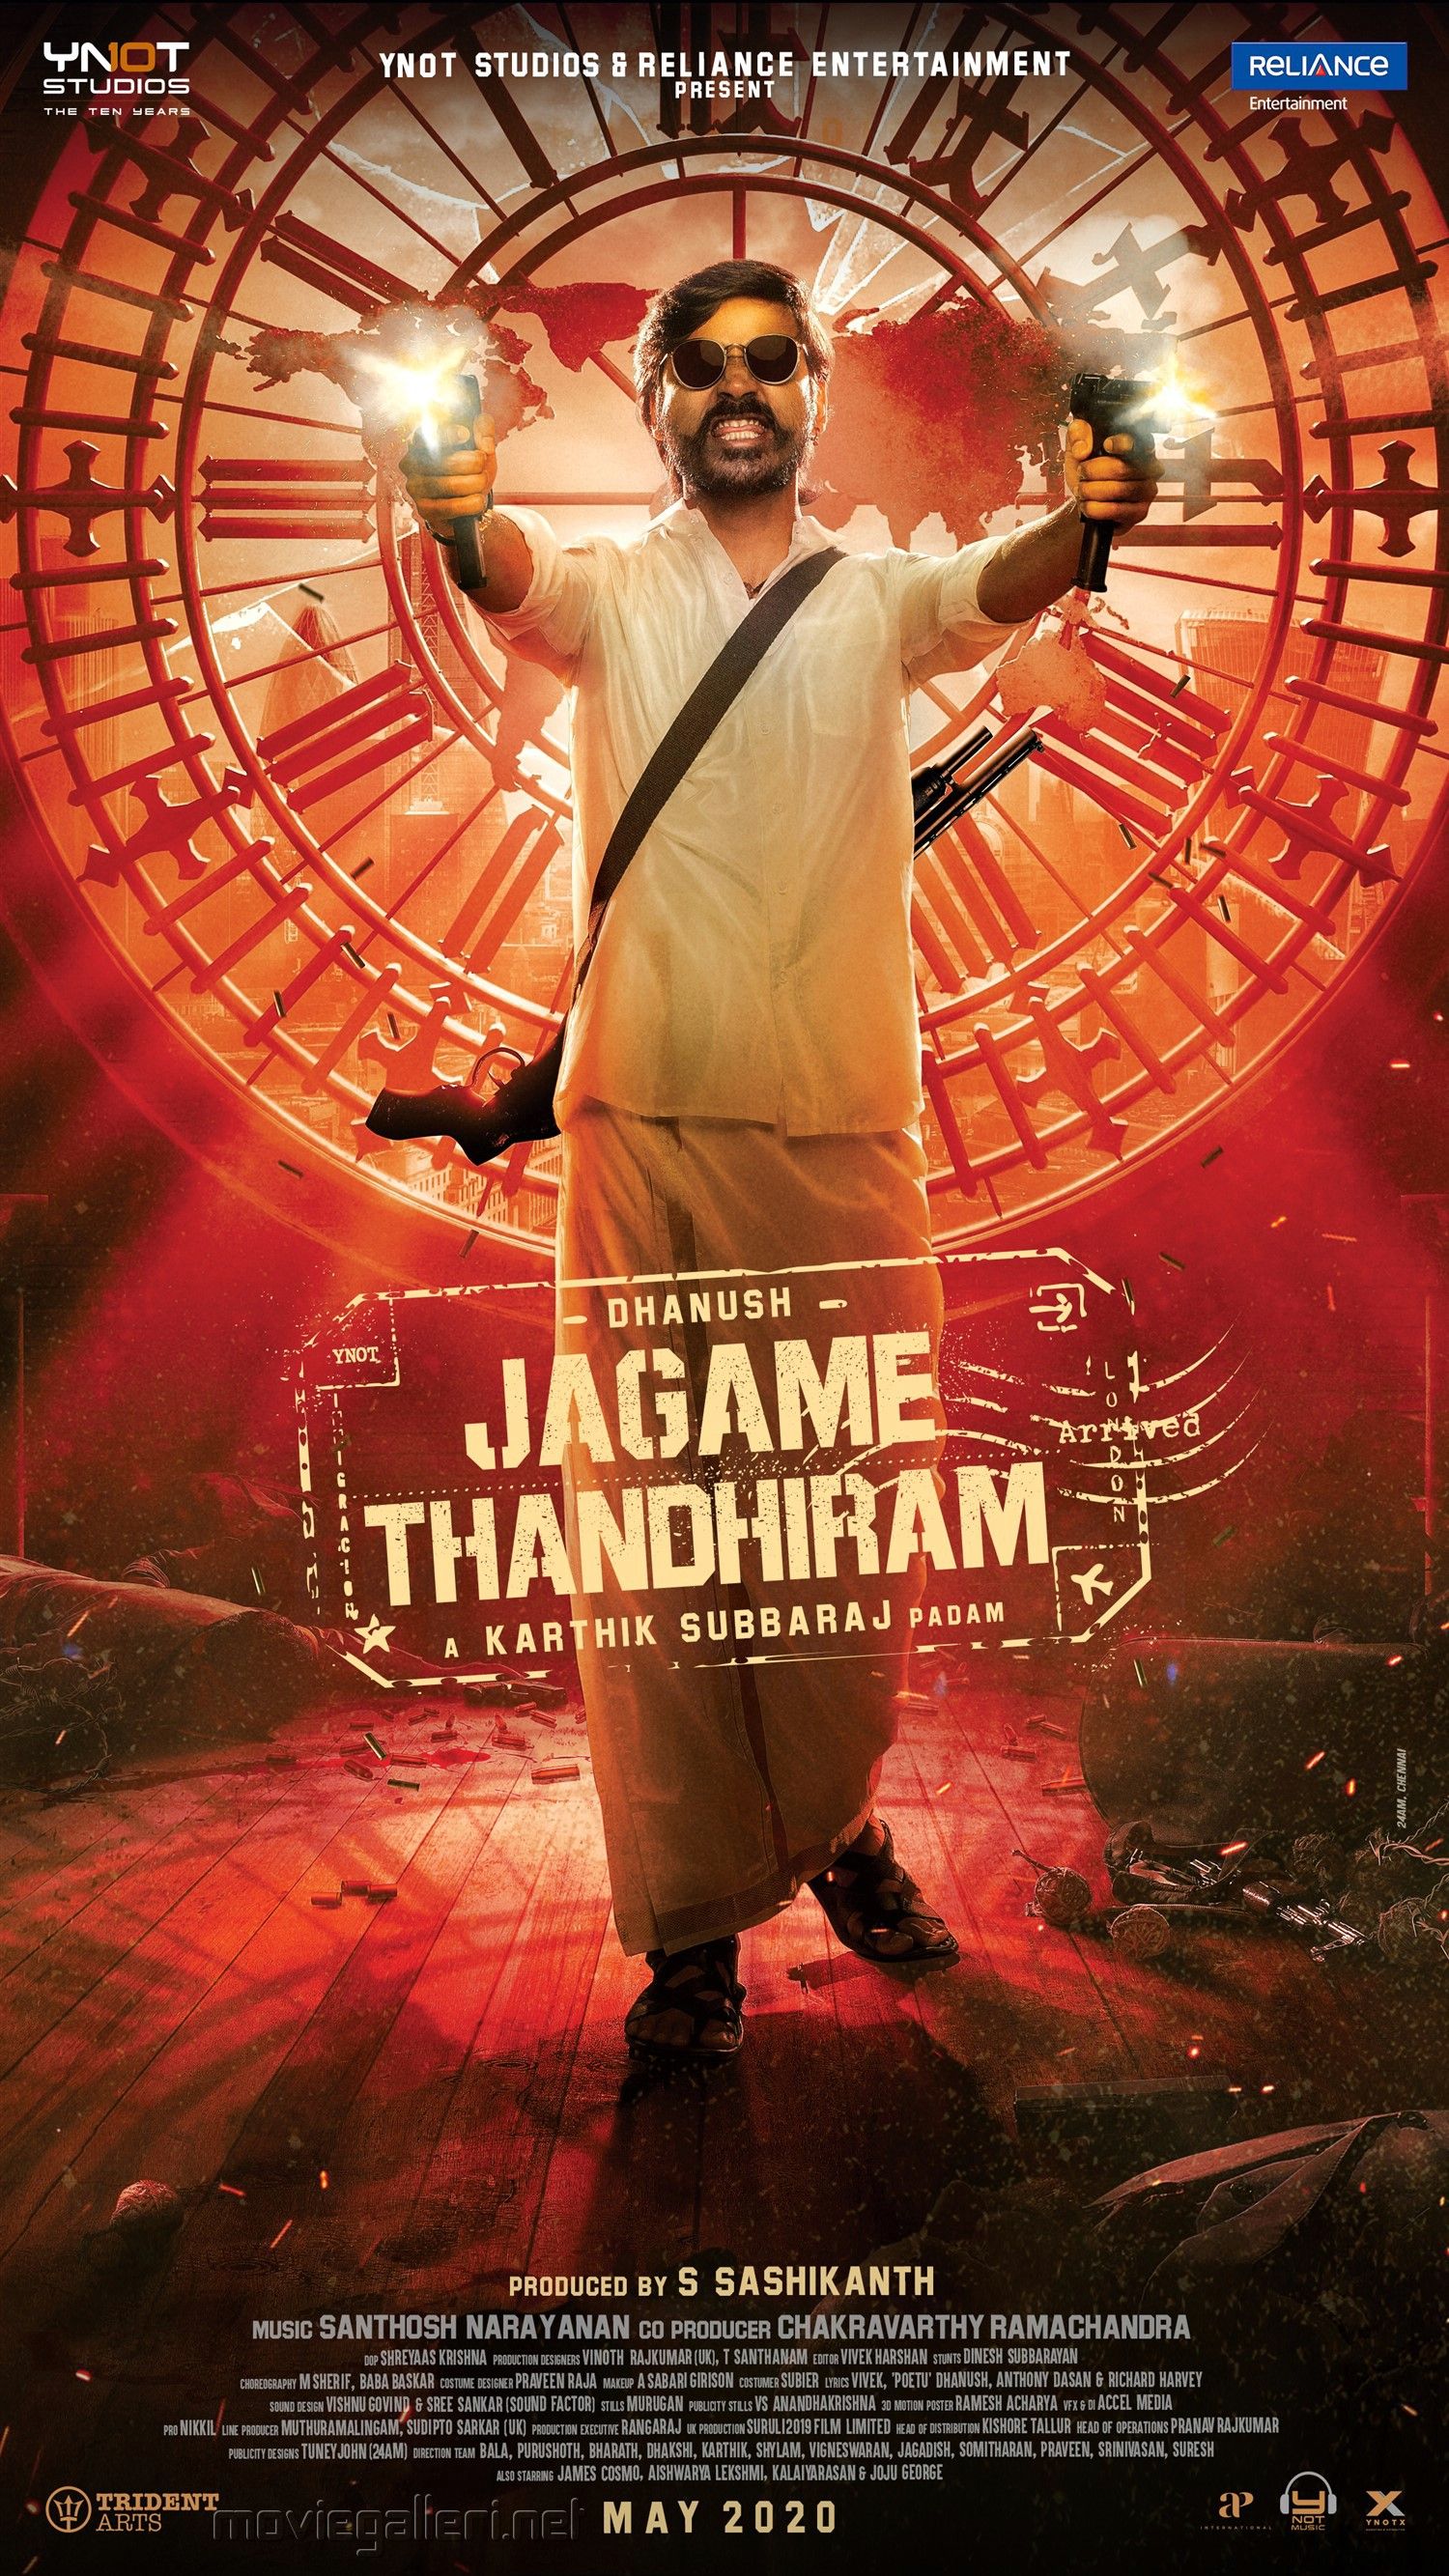 Actor Dhanush Jagame Thandhiram First Look Poster HD. New Movie Posters